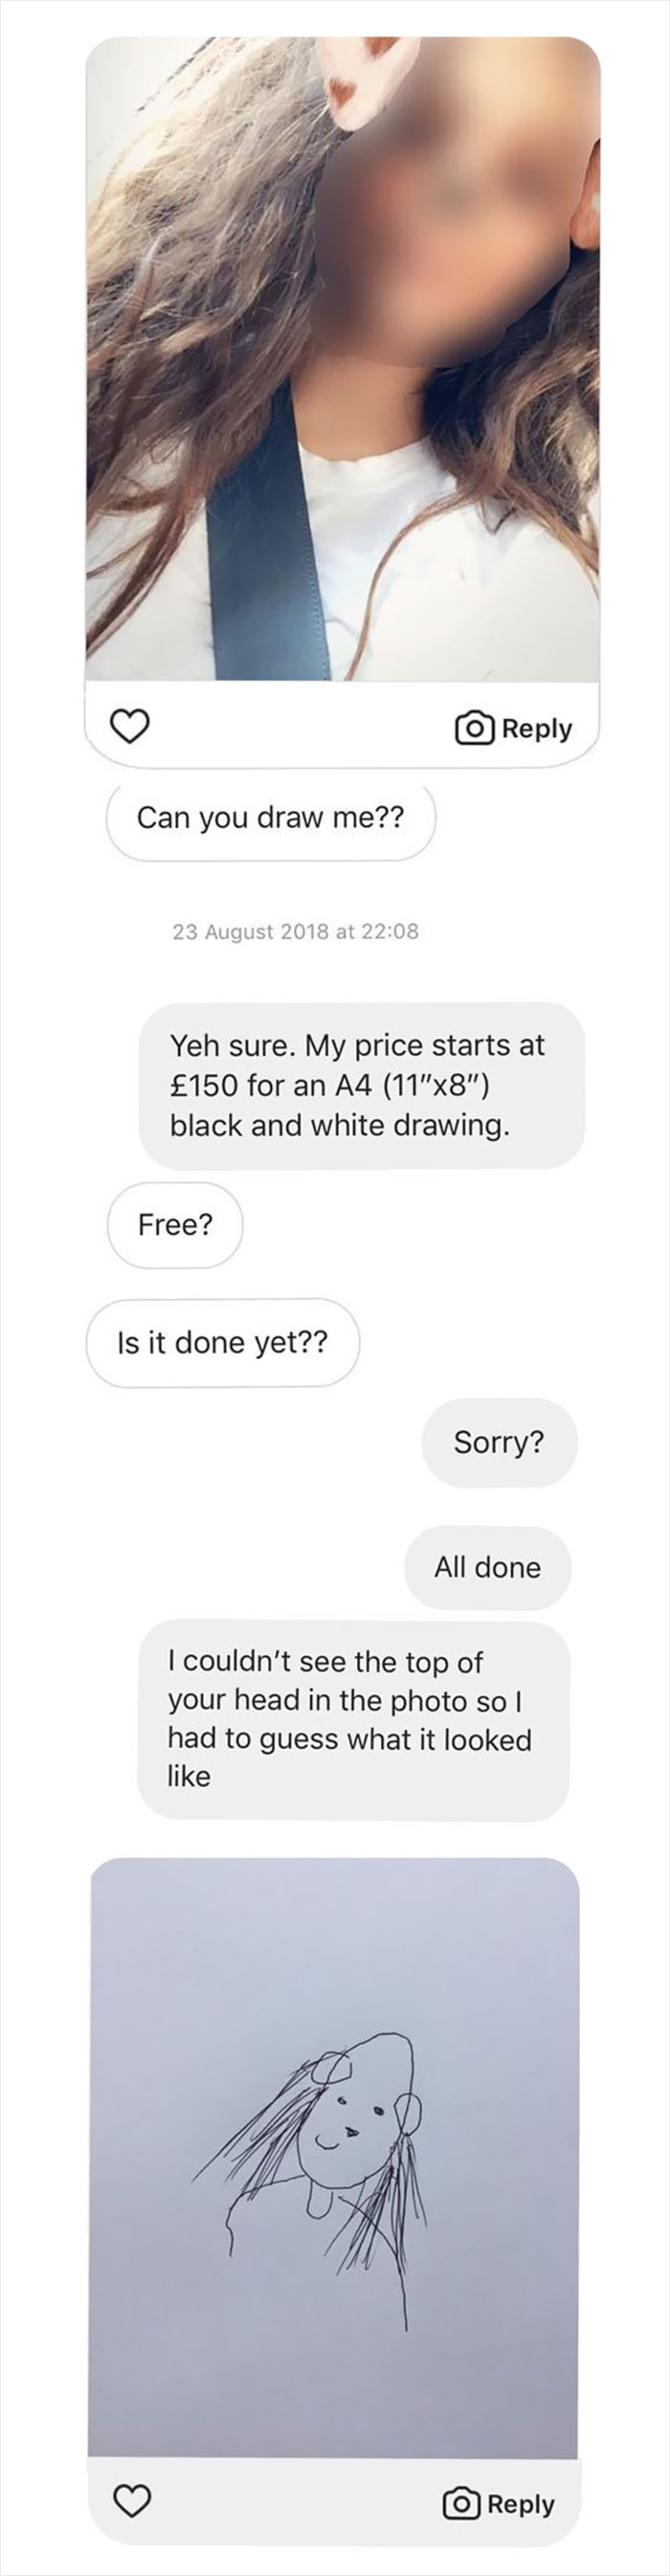 Choosing Beggar Wants Free Drawing From A Professional Artist, Ends Up Getting Trolled